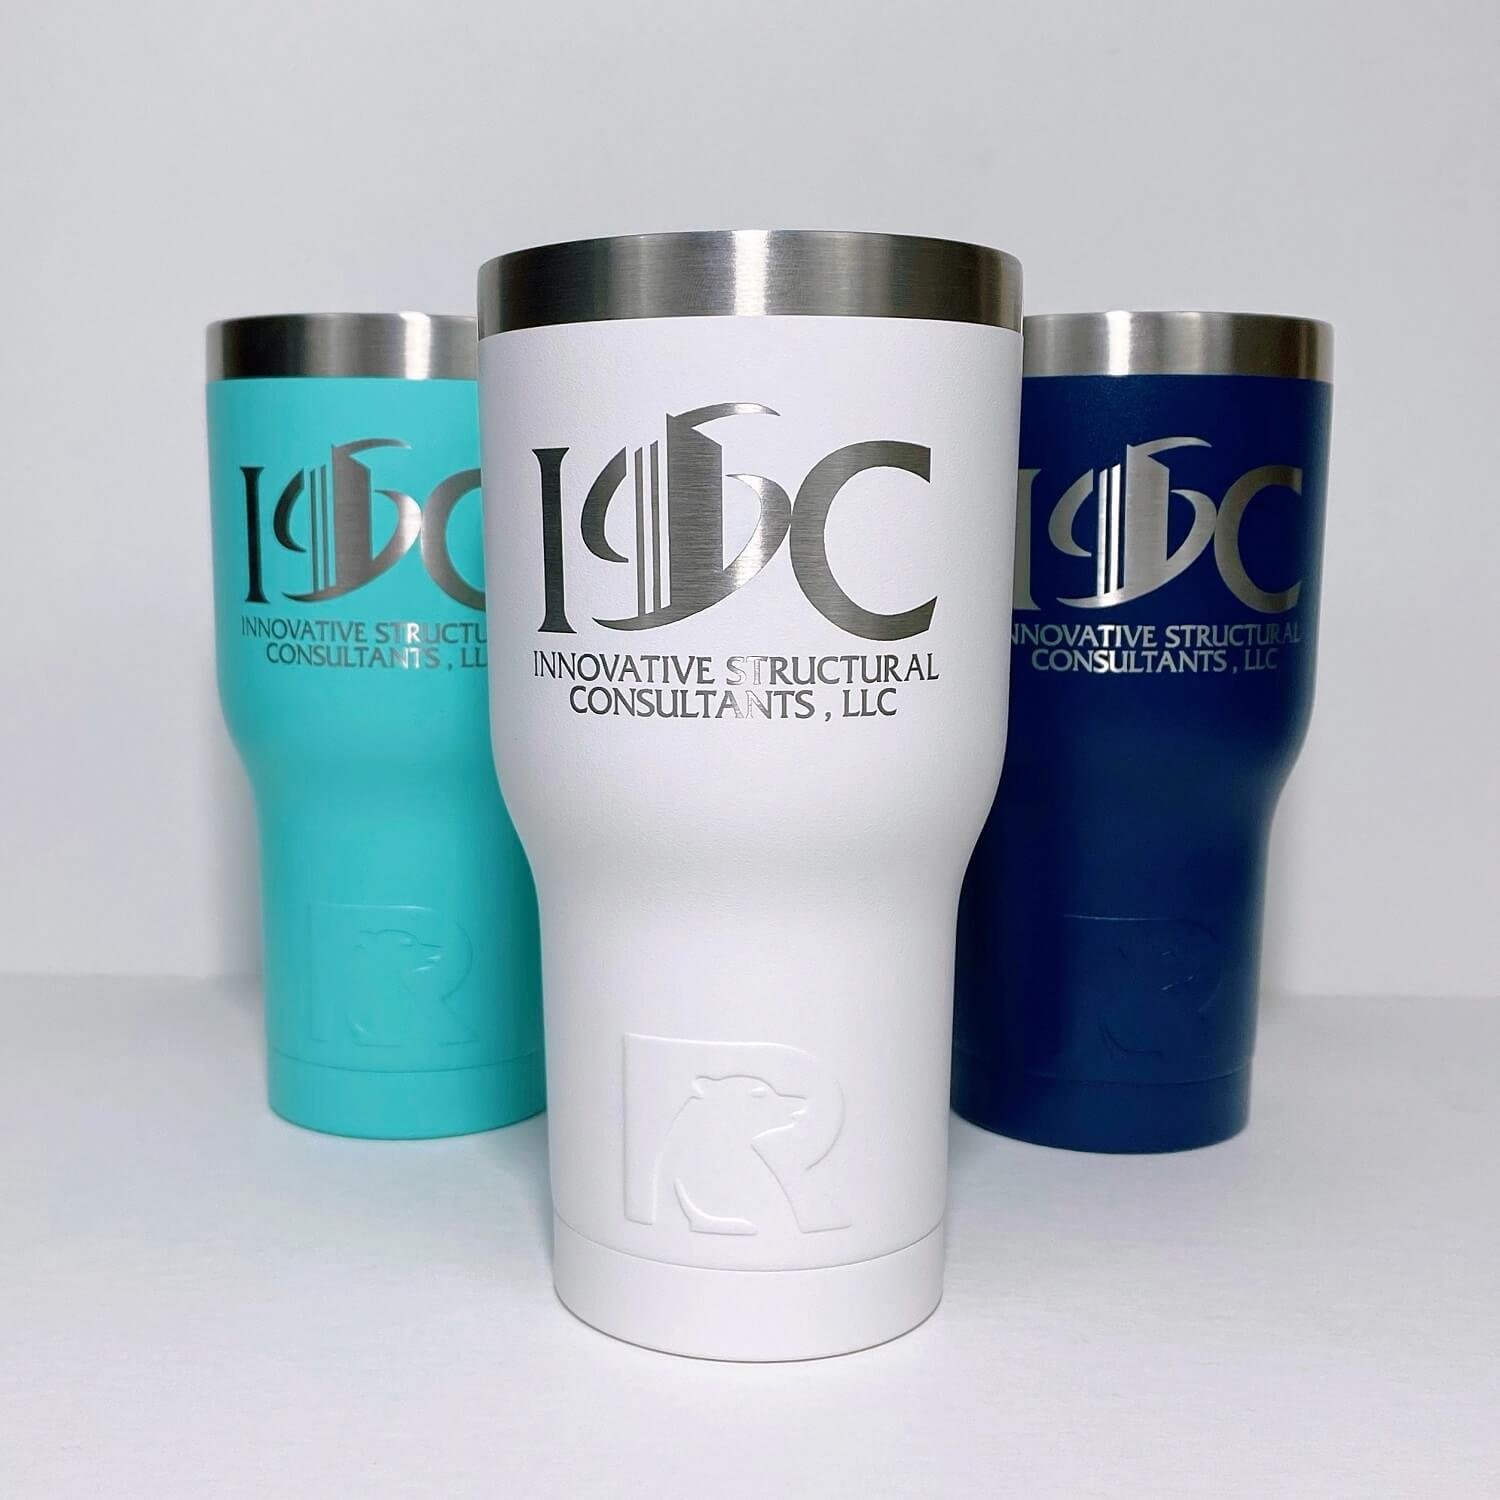 Branded rtic Cups – Engraved rtics – Custom rtic tumblers – Custom tumblers – Custom rtic cups - Branding Projects from Engrave It Houston